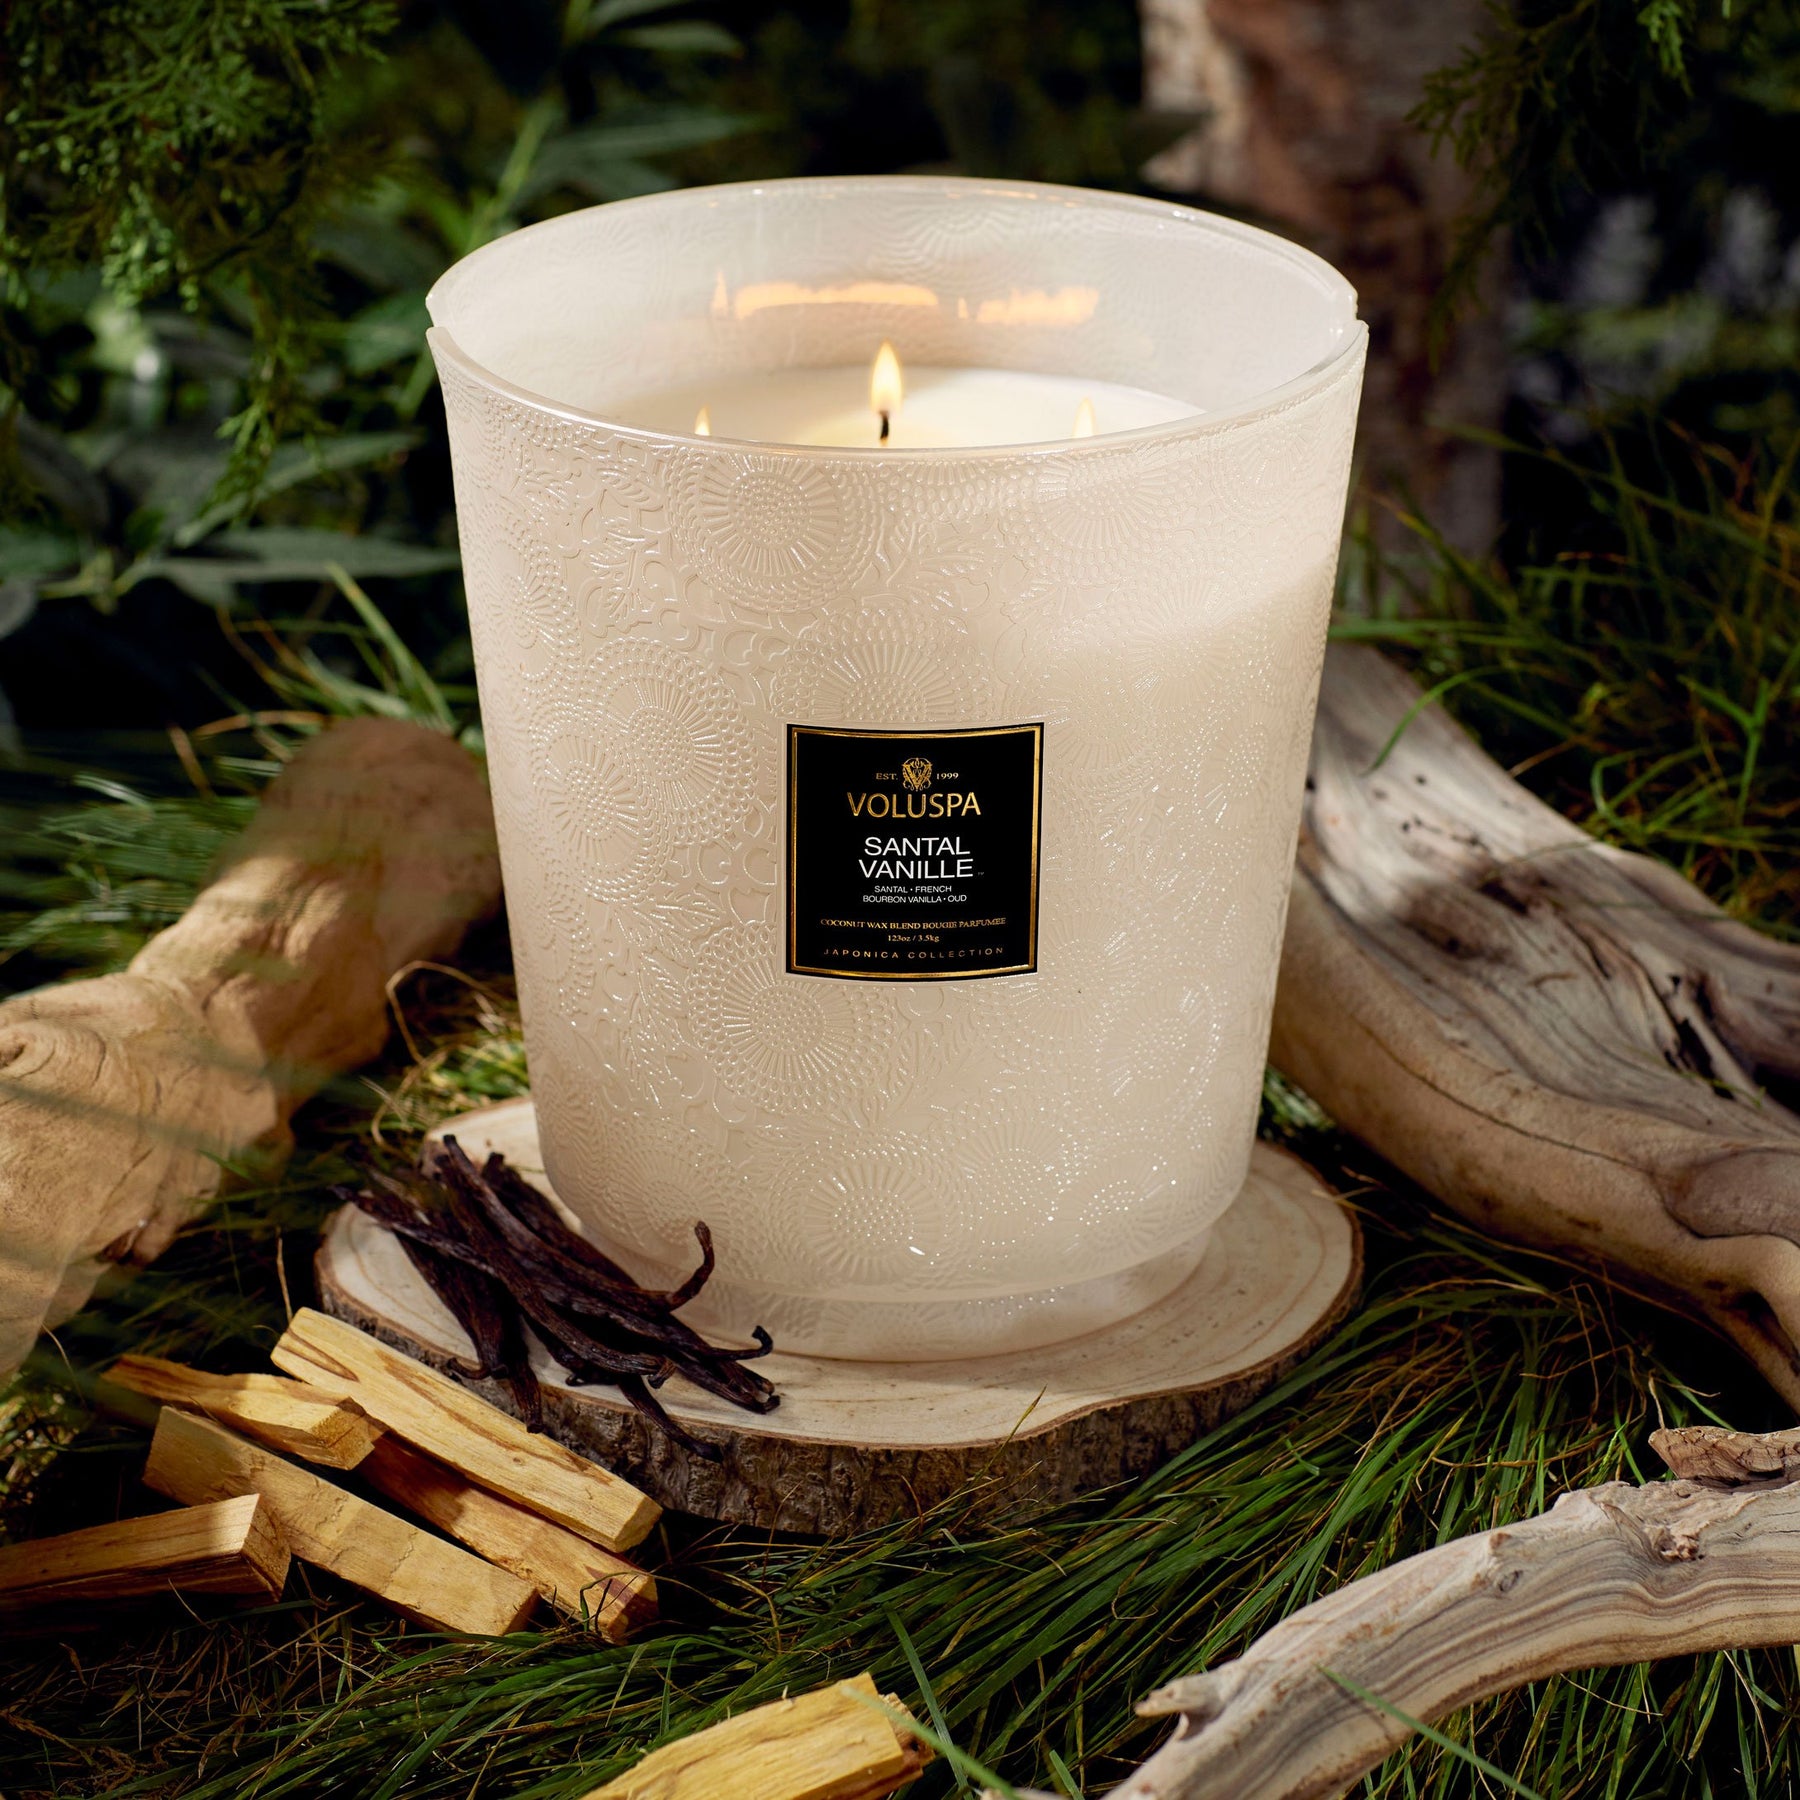 Santal Vanille - 5 Wick Hearth Candle